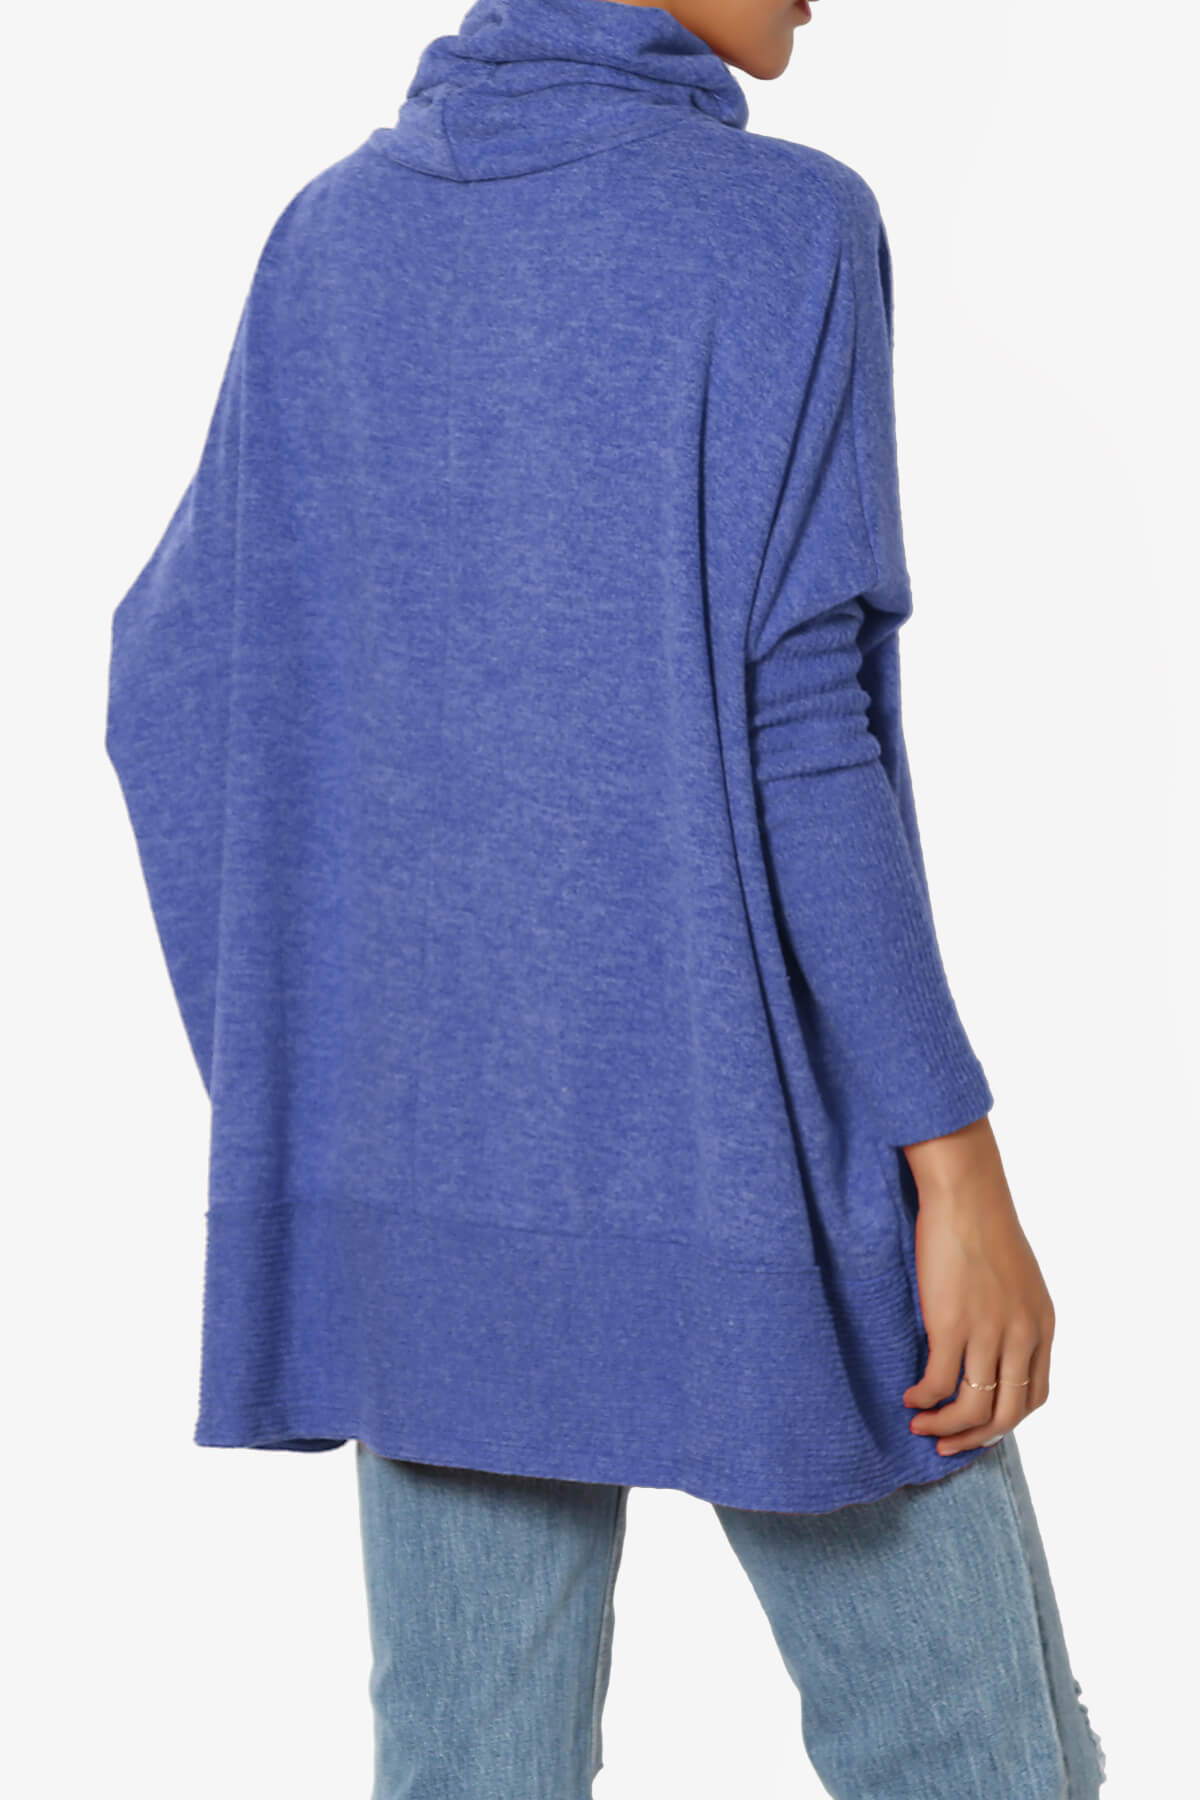 Load image into Gallery viewer, Barclay Cowl Neck Melange Knit Oversized Sweater BRIGHT BLUE_4
